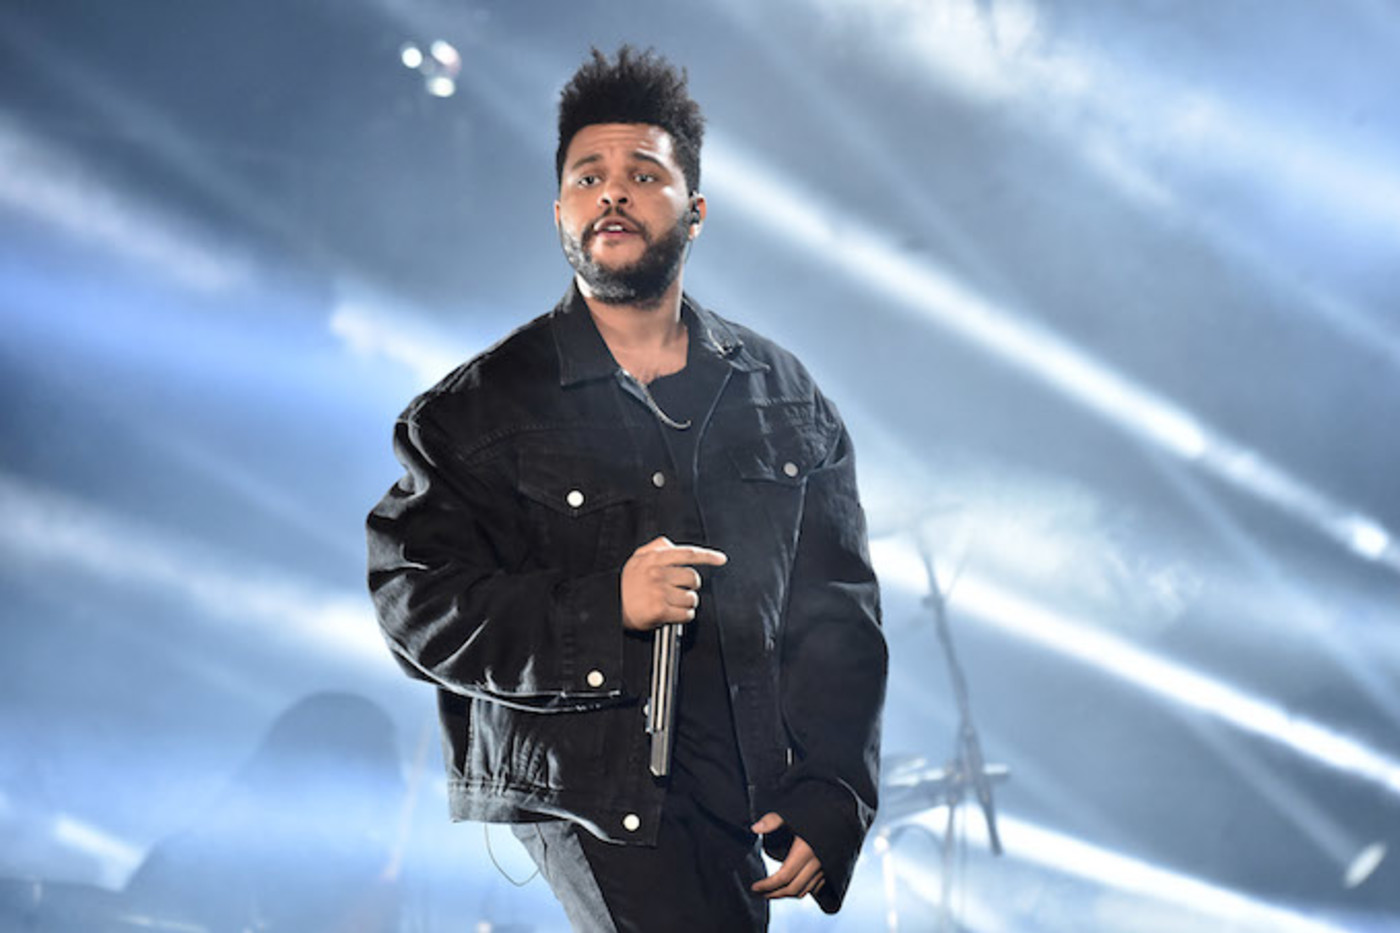 Xo S Cash Debuts New Songs By 21 Savage Offset Travis Scott And